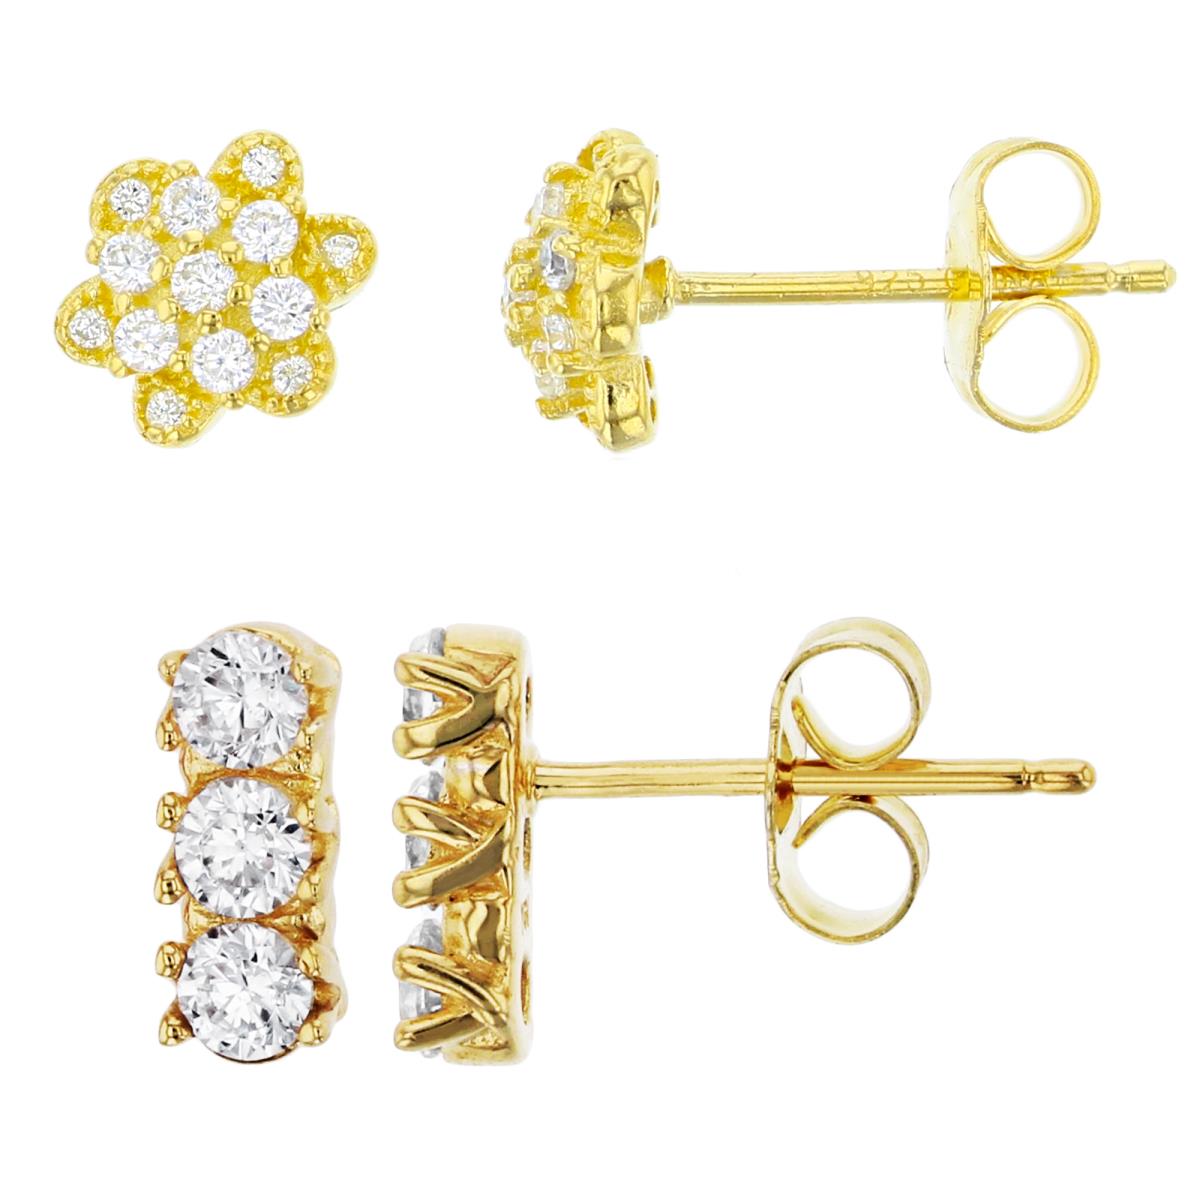 Sterling Silver Yellow Rd CZ 3-Stone Cut & Pave Flower Stud Earring Kits 